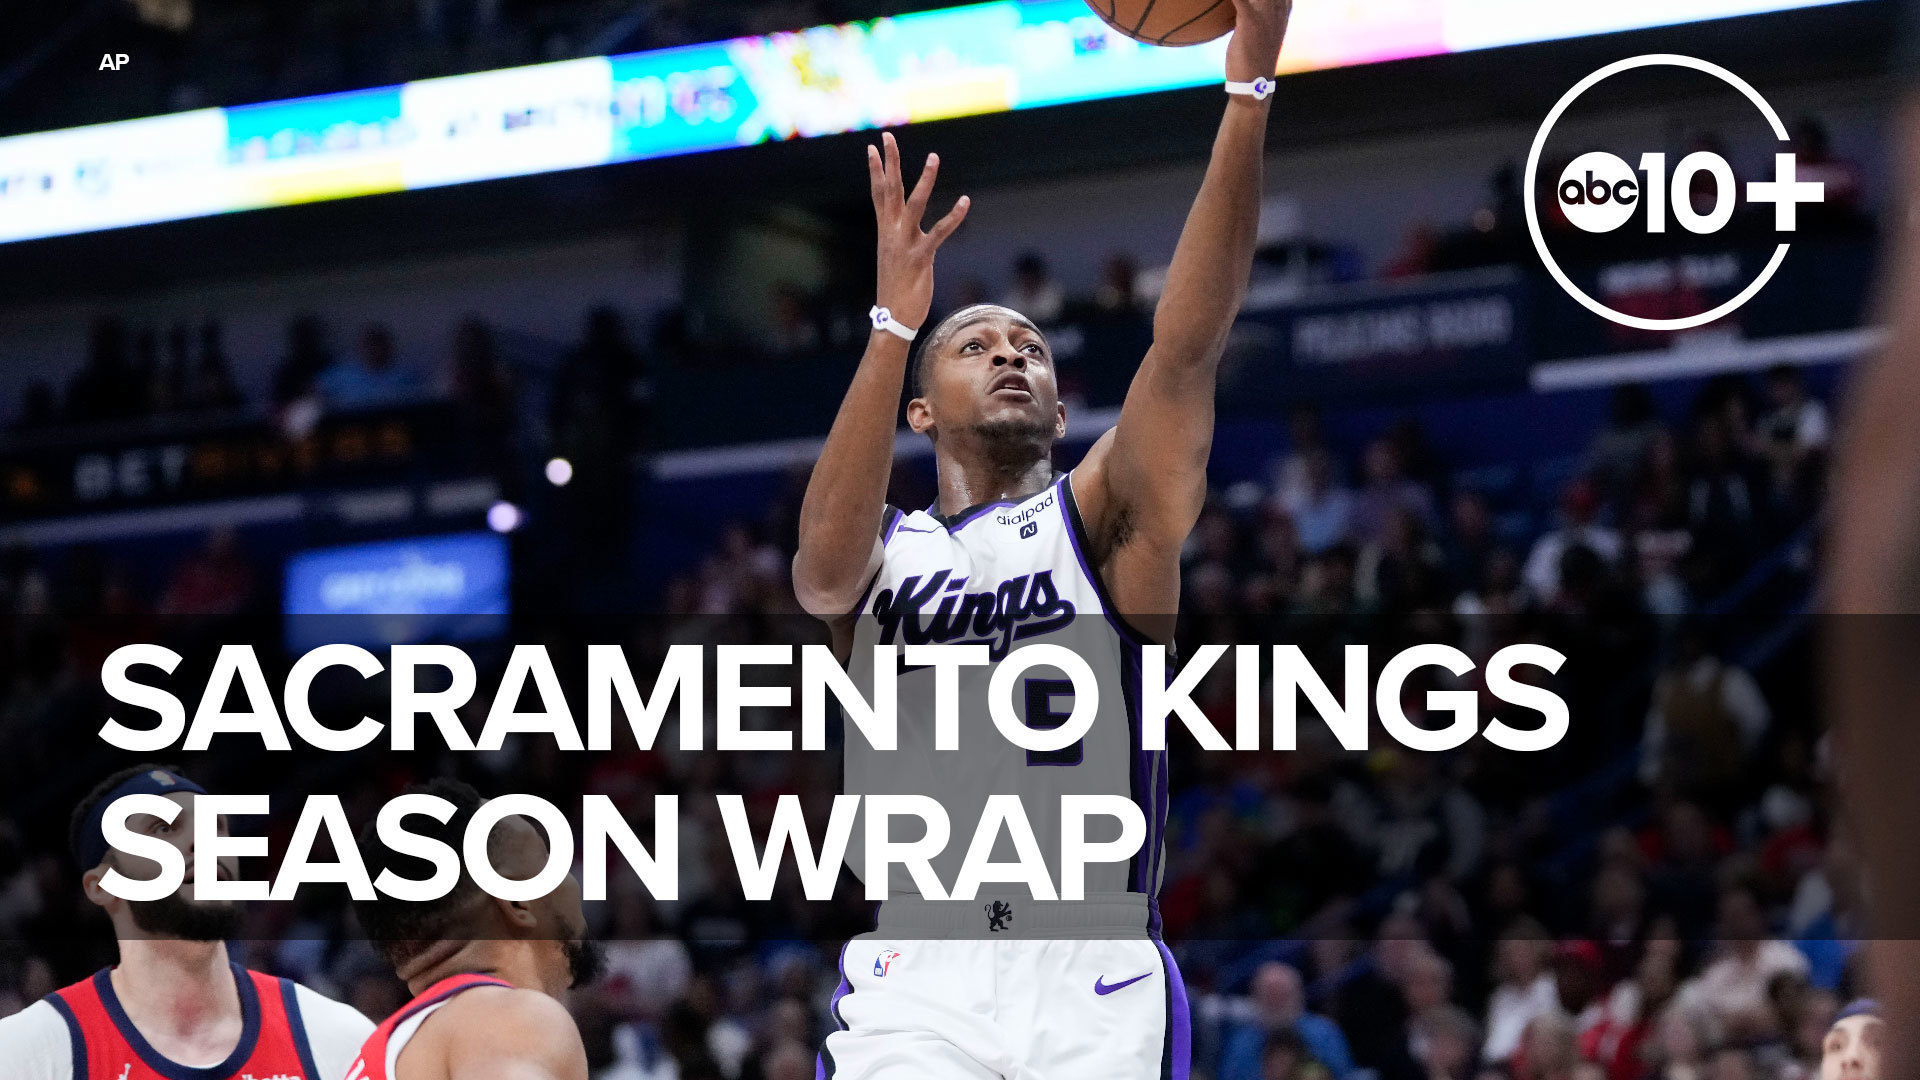 In this episode, ABC10's Kevin John and Matt George give their insight on the Kings 2023-24 season and the top moments that captured all the "light the beam" energy.